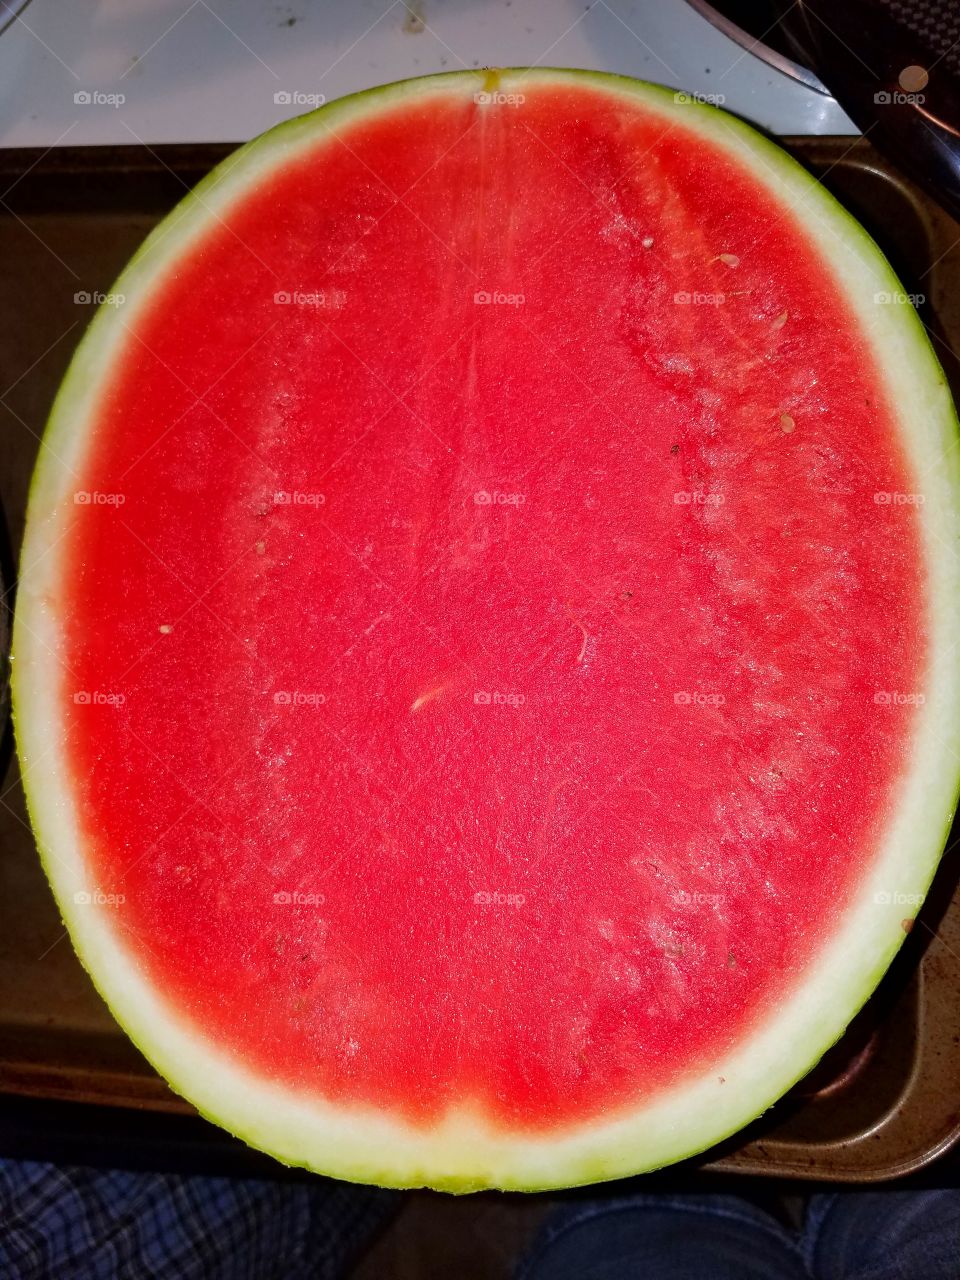 Perfectly perfect seedless Red Watermelon. So ripe, juicy & sweet. Refreshingly lovely.